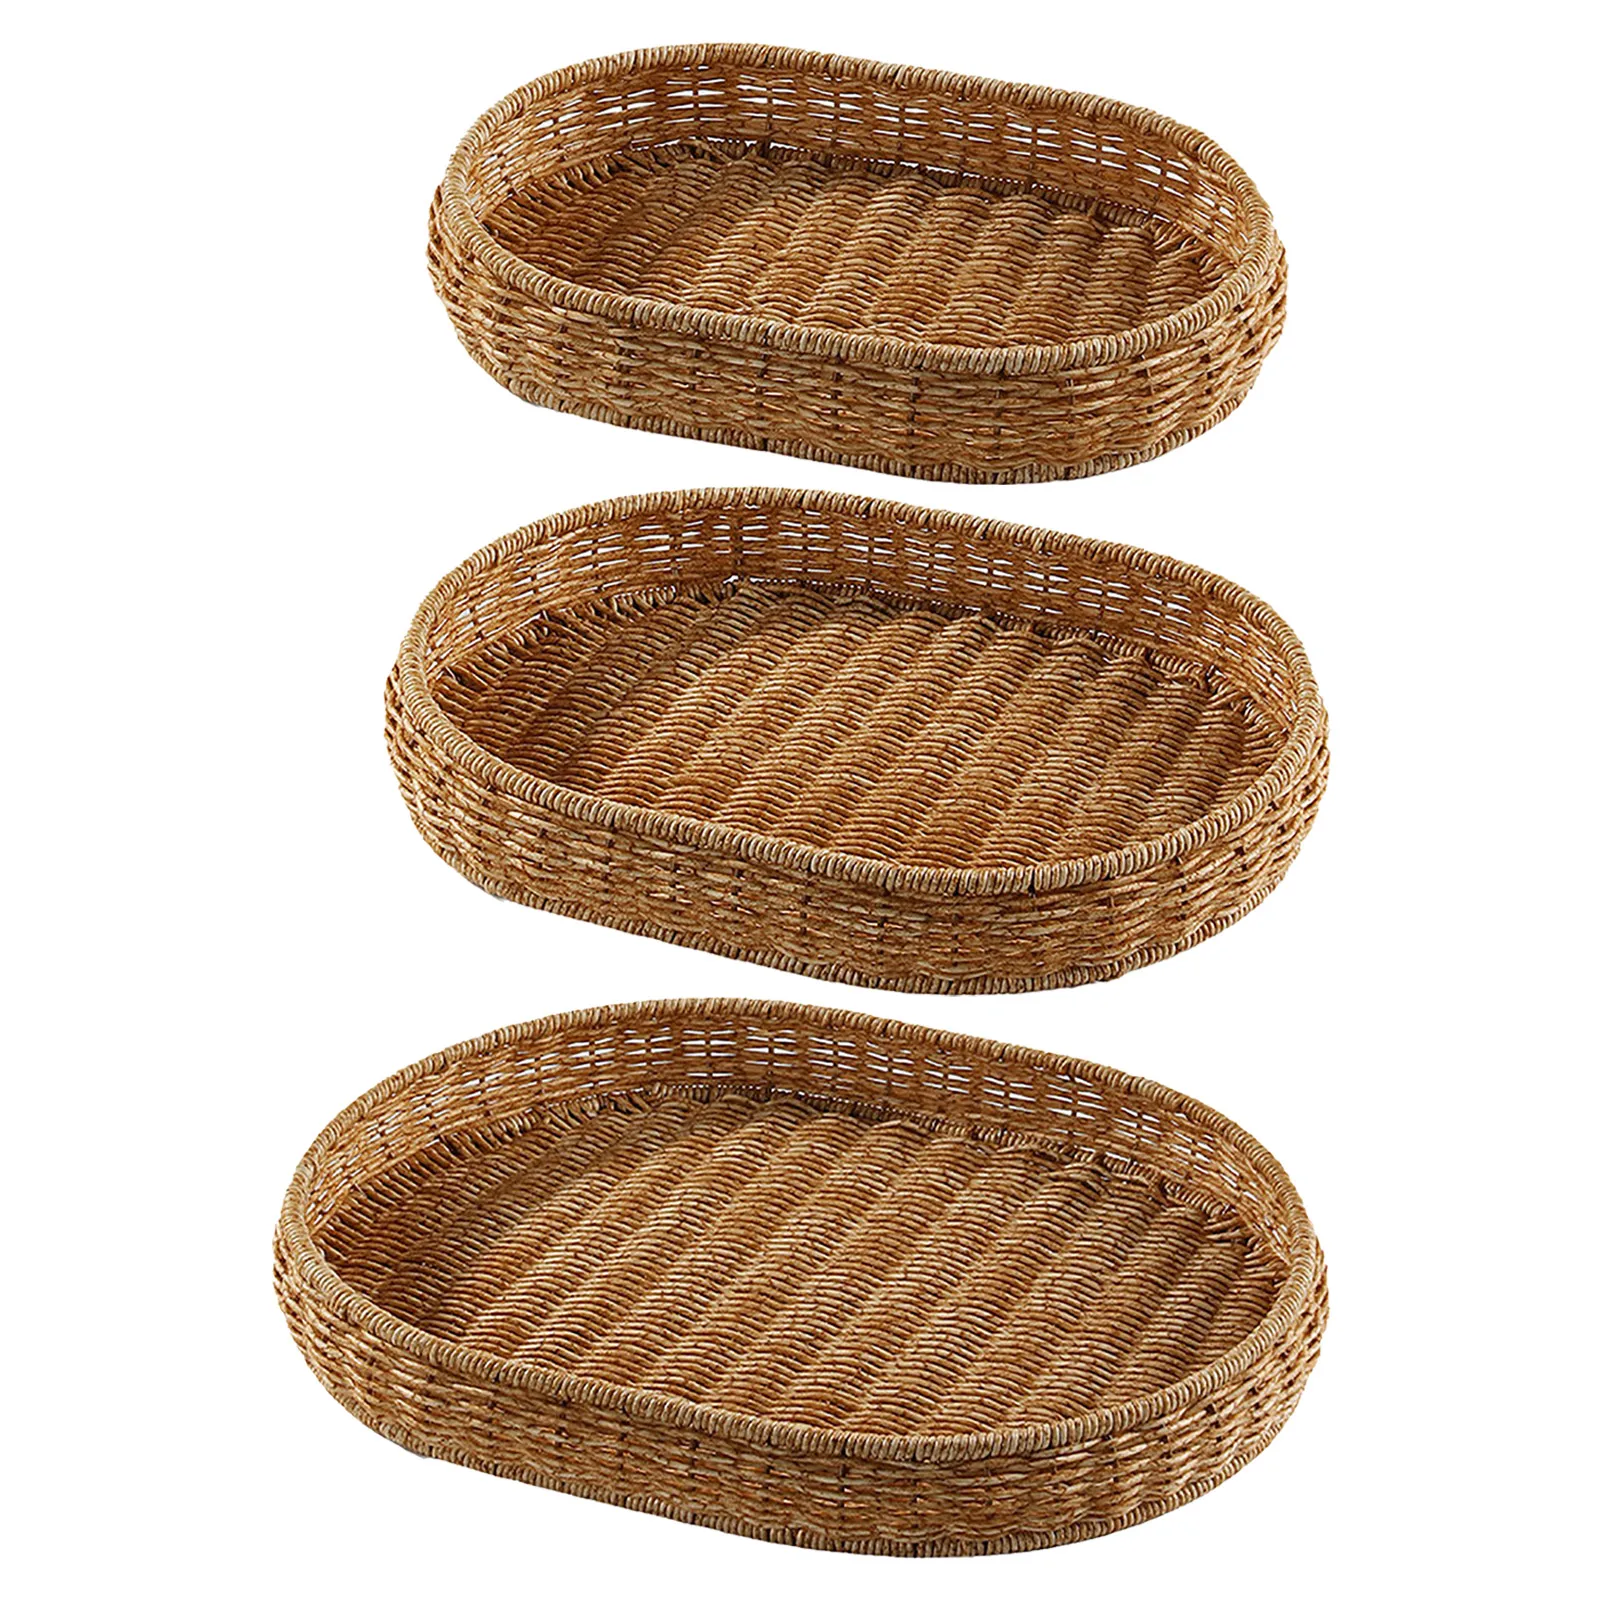 

Rattan Handwoven Trays Nature Rattan Storage Baskets Oval Woven Fruit Baskets Rattan Tray For Coffee Table Decorative Wicker